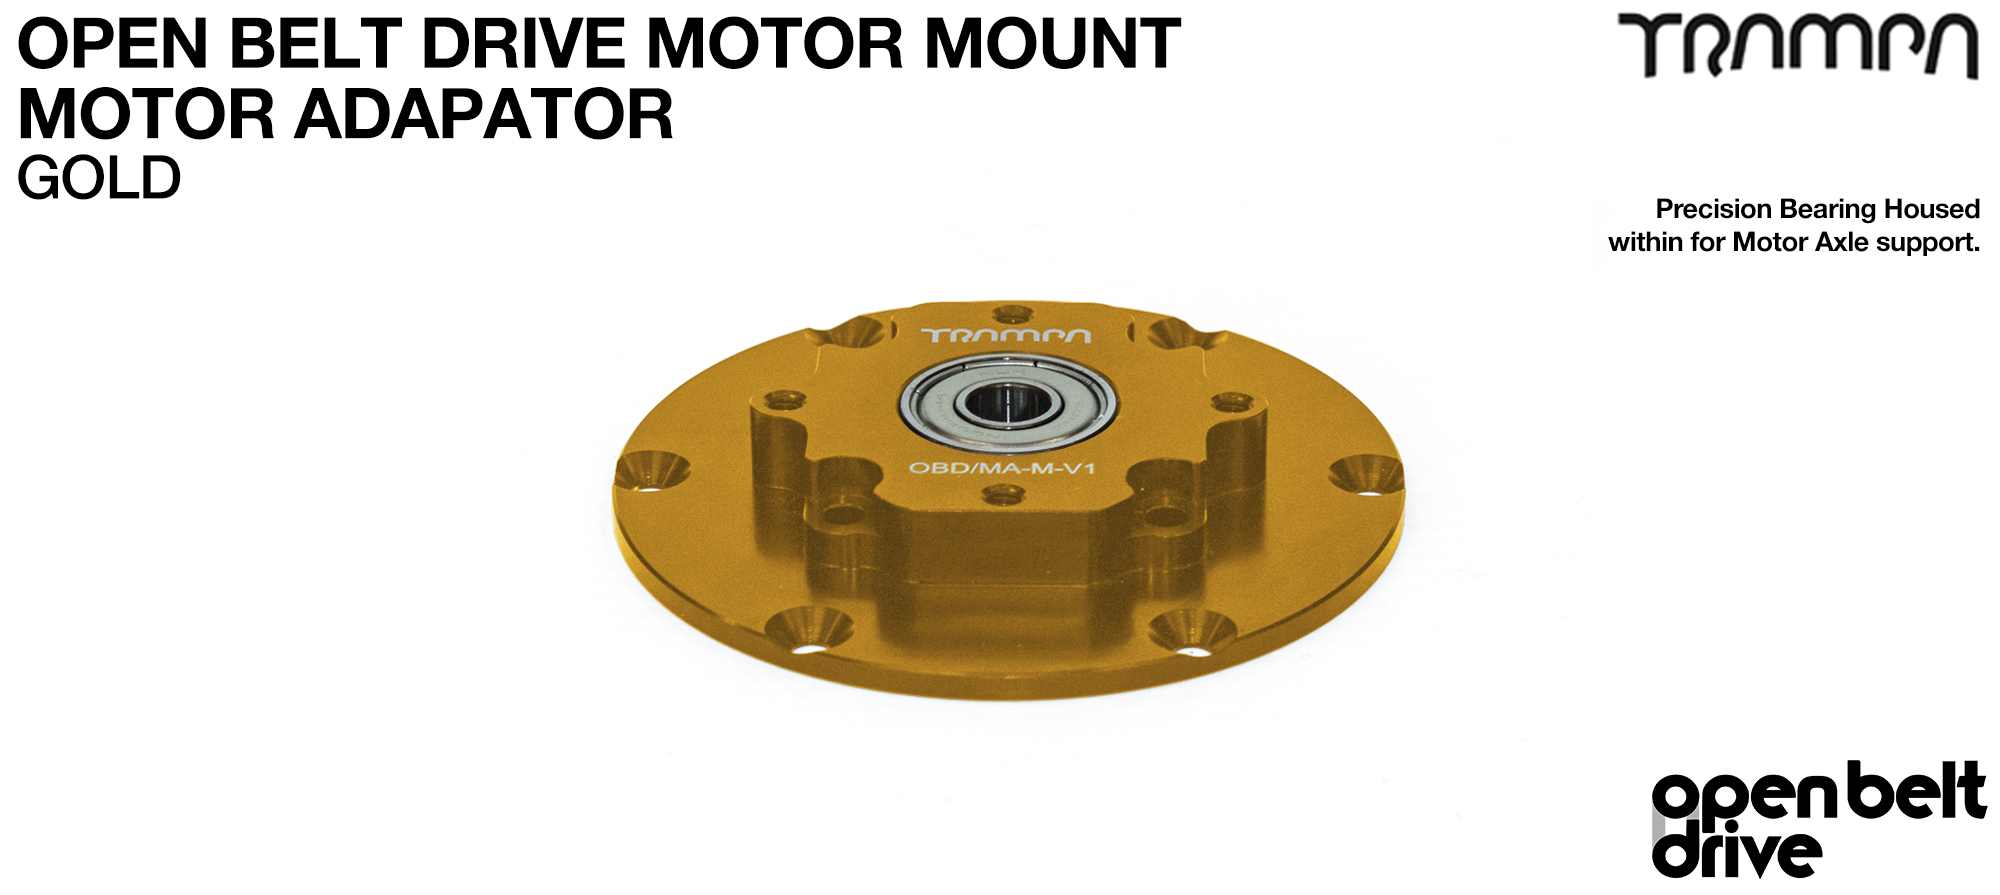 OBD Motor Adaptor with Housed Bearing - GOLD 